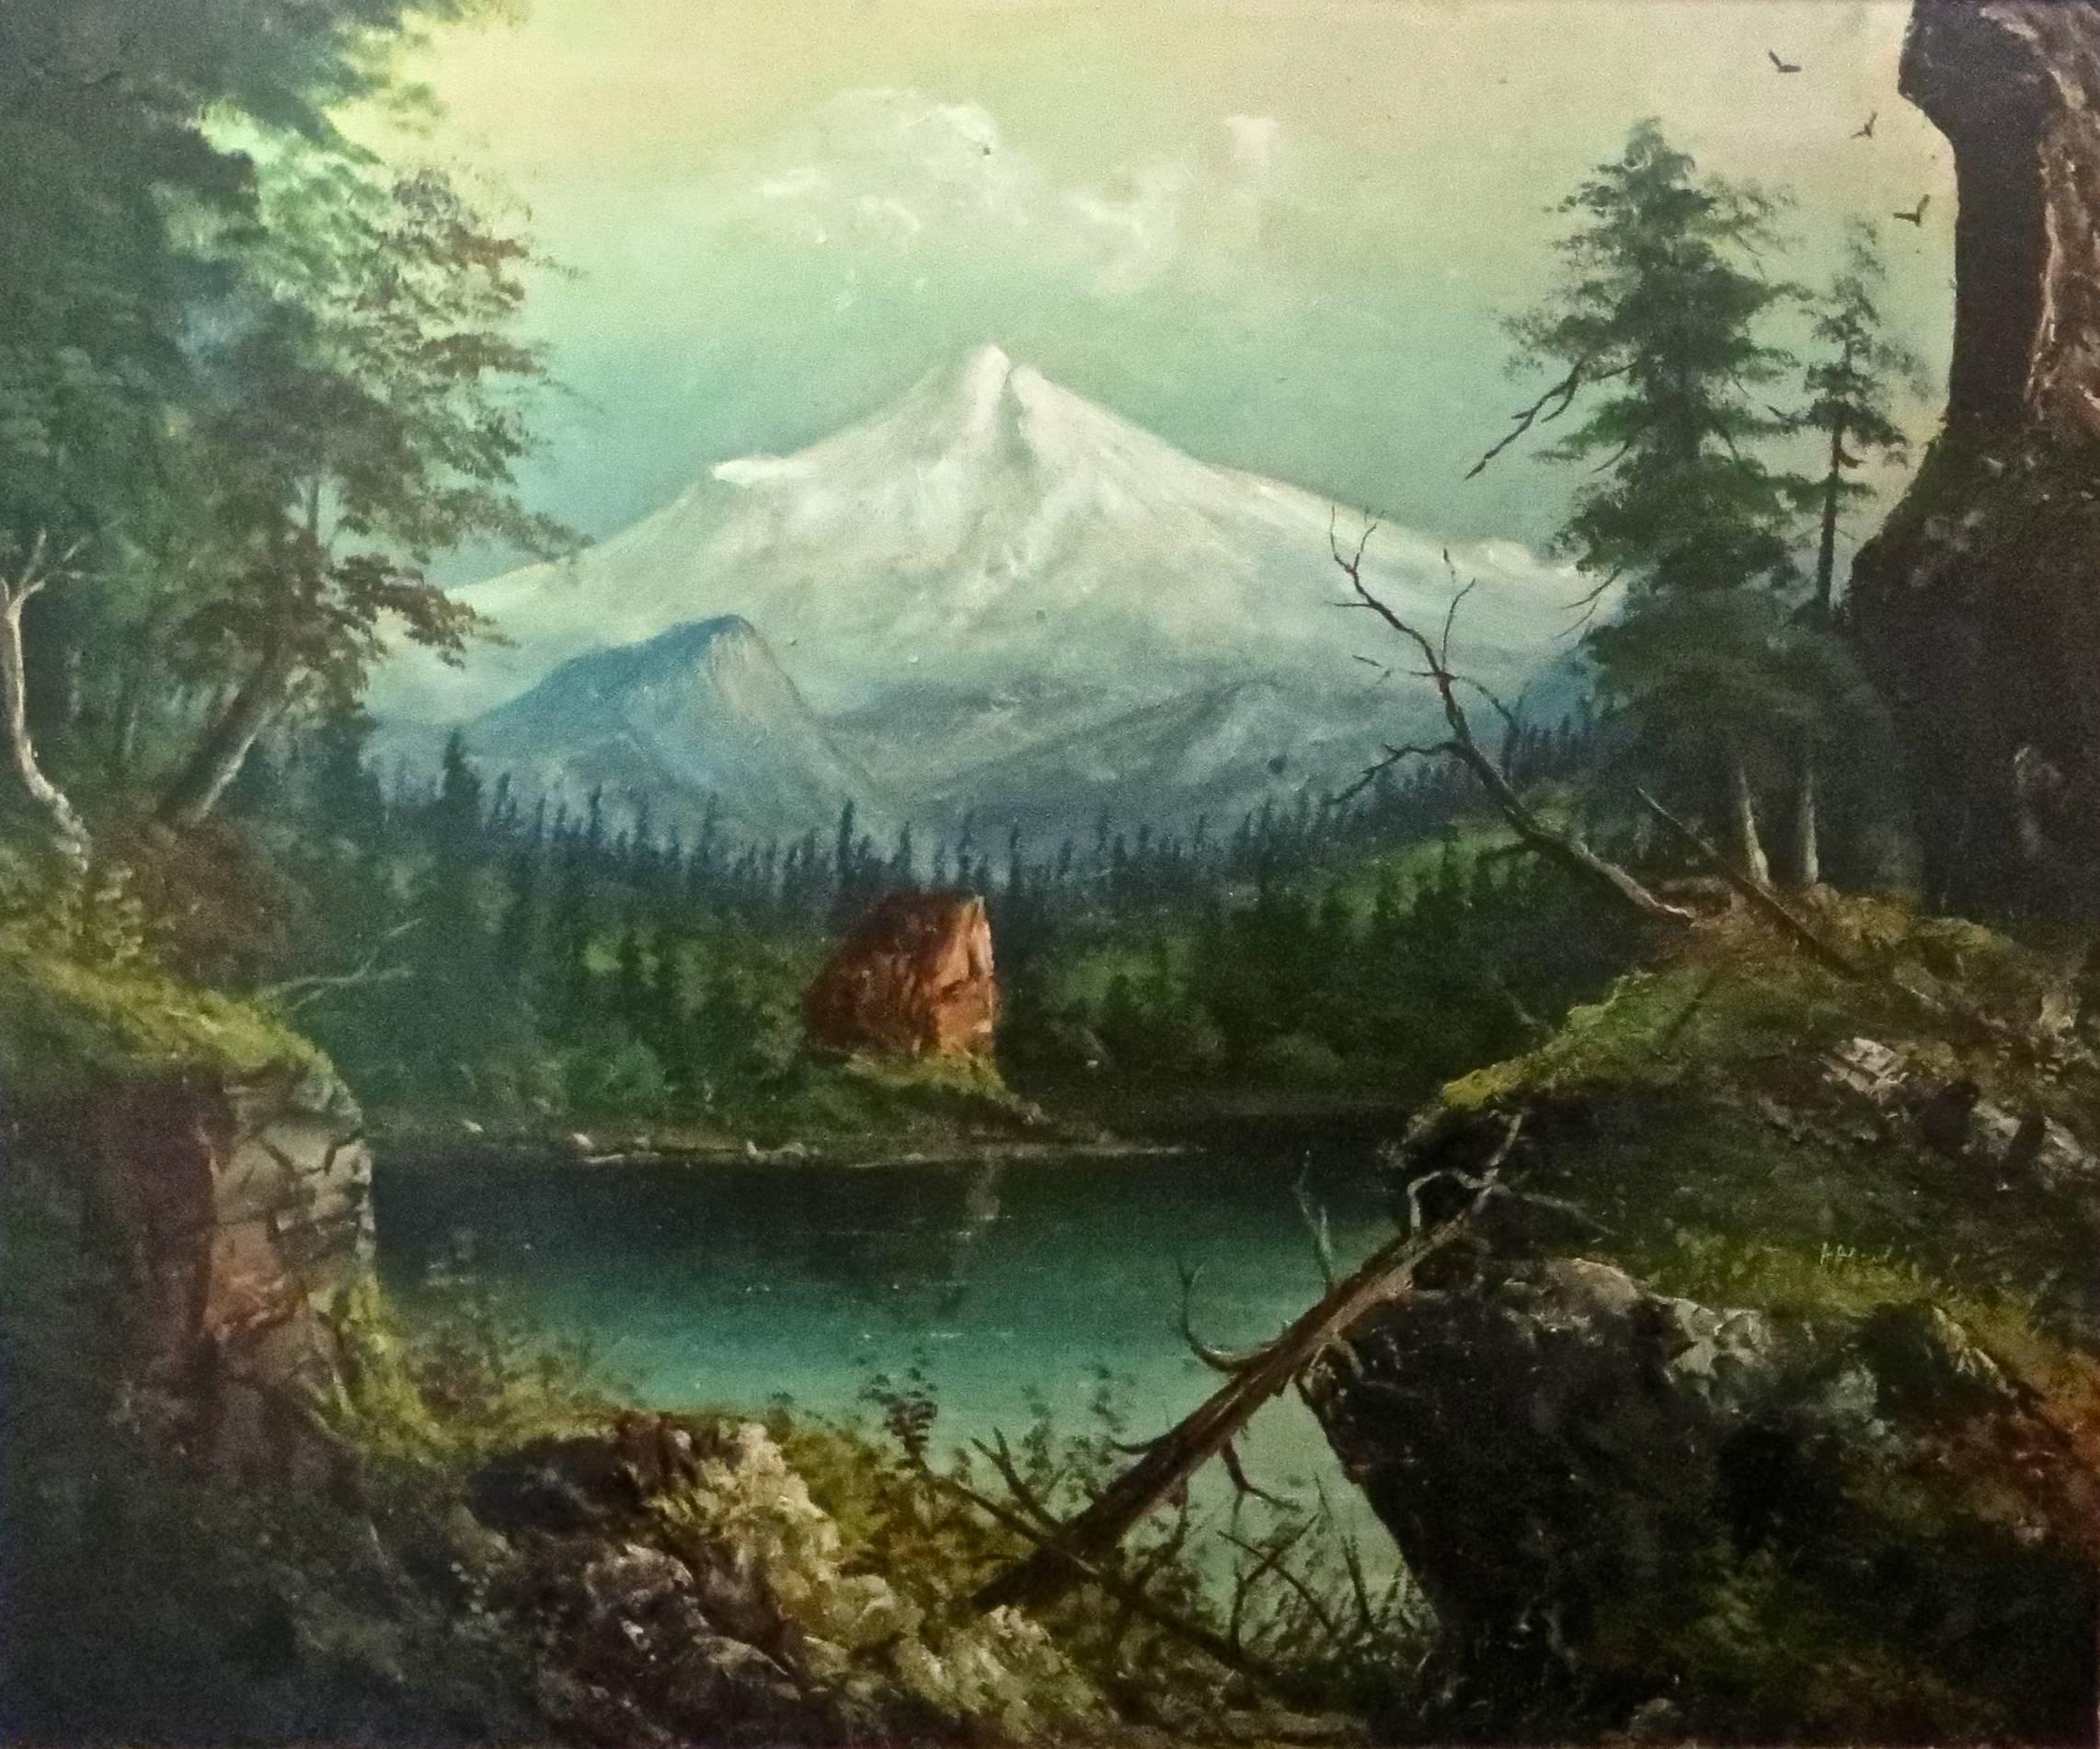 Snow covered Mount Hood located in Oregon is the subject of this oil painting on board. Pine trees in the background with a lake in the foreground surrounded by cliffs and rocks, and a cabin on the back side of the lake, round out the subject